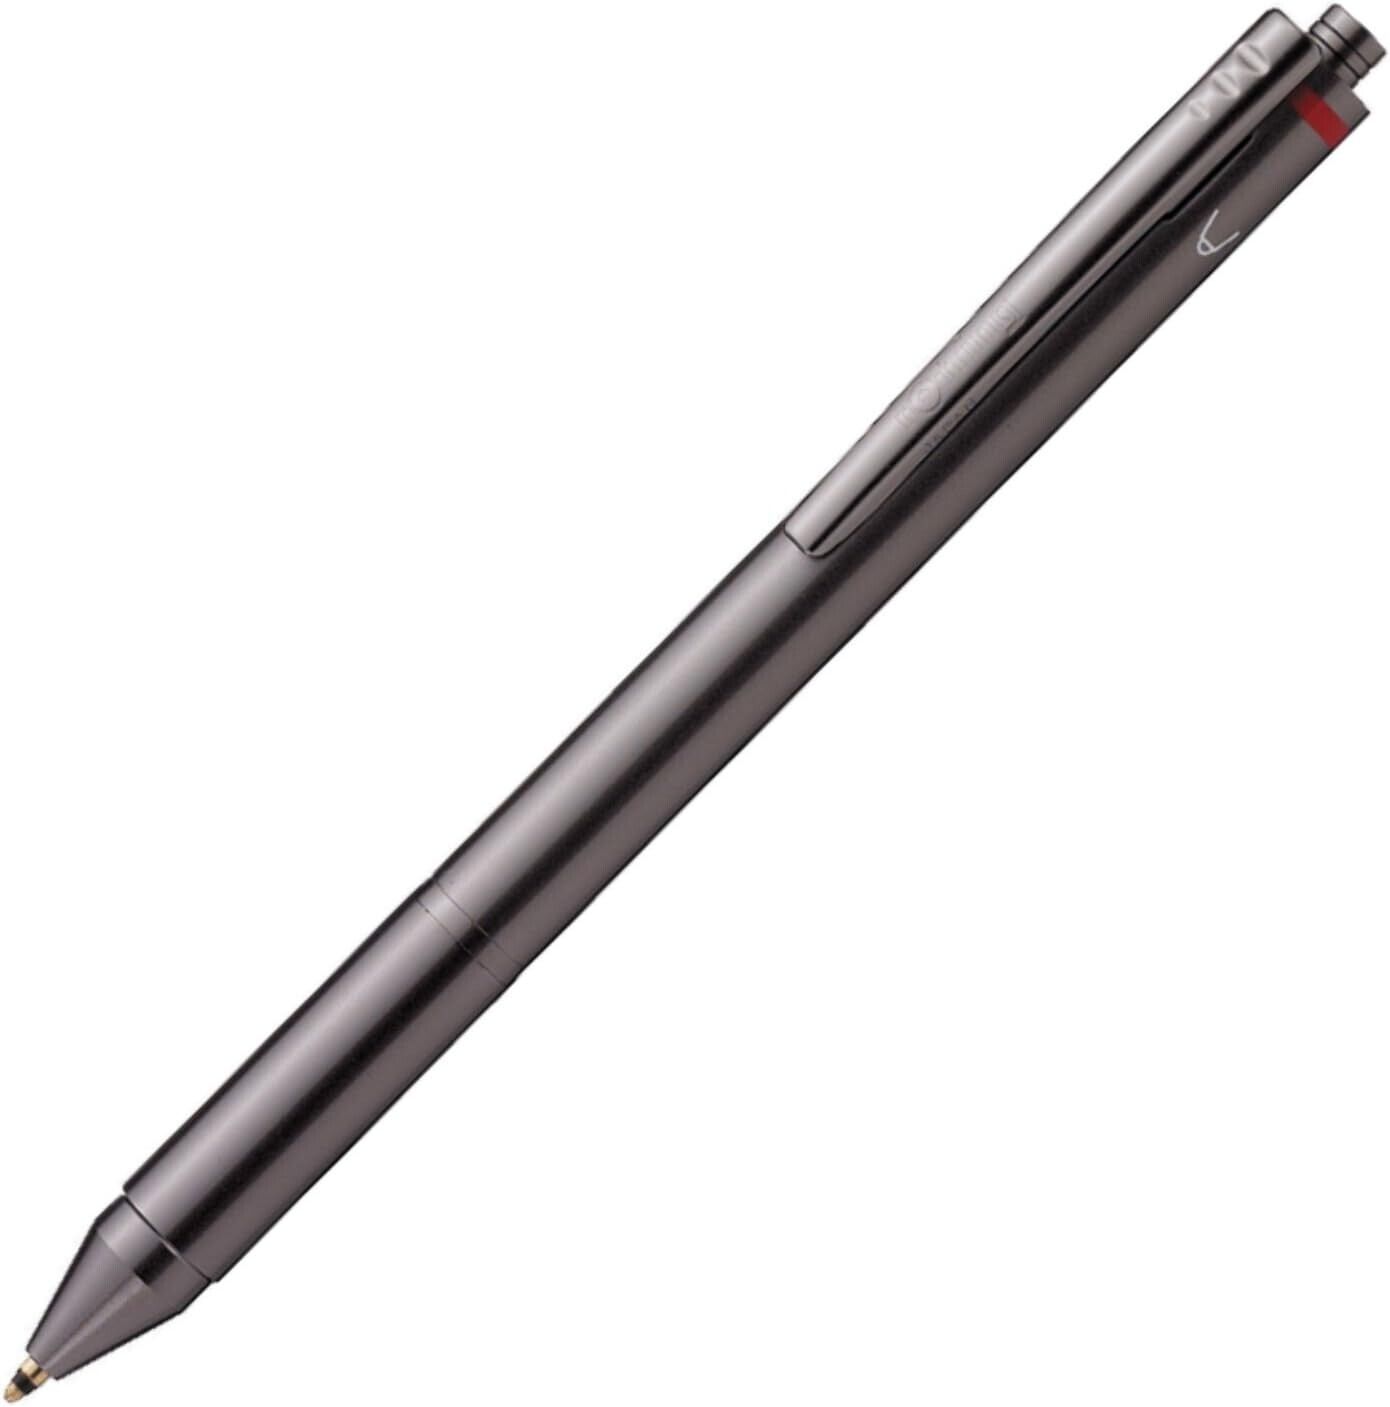 rOtring Multi-Function Pen, Four-In-One, 0.5mm Mechanical Pencil with Ballpoint